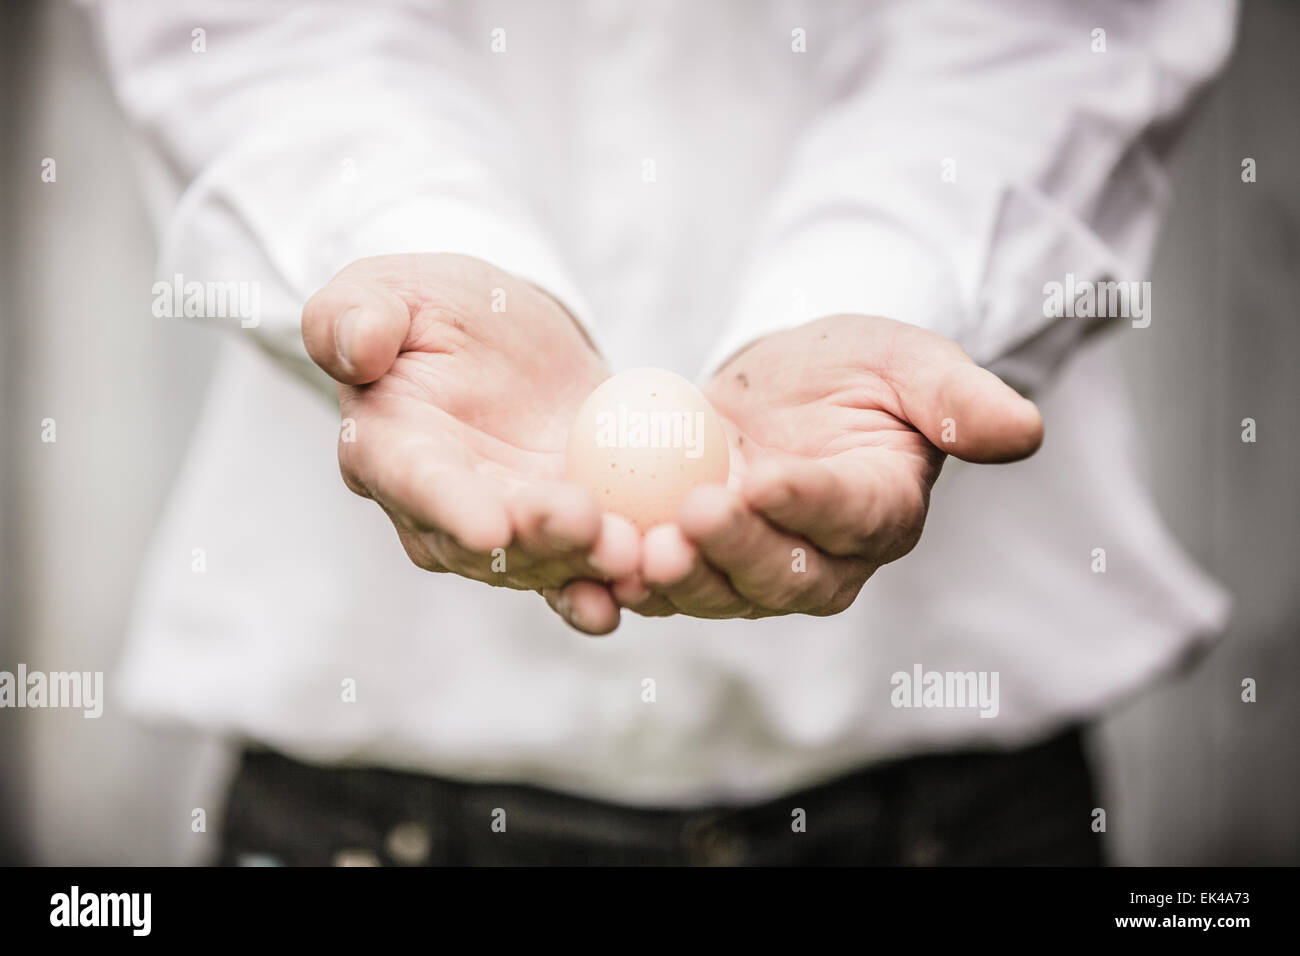 Farmer Showing an Egg in front of the Farm Stock Photo